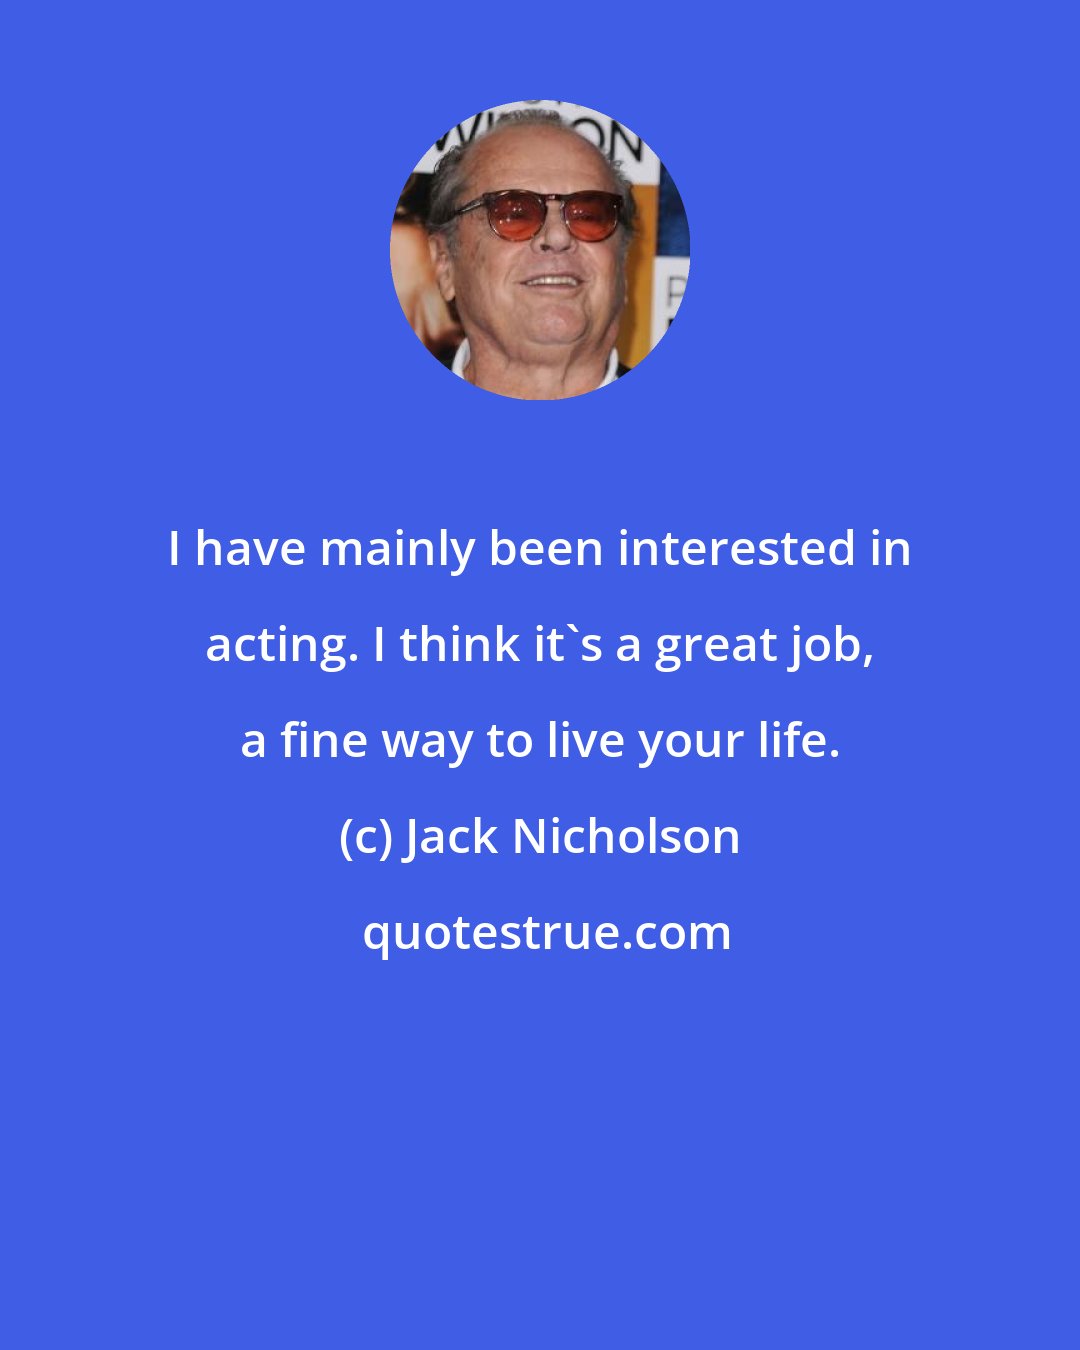 Jack Nicholson: I have mainly been interested in acting. I think it's a great job, a fine way to live your life.